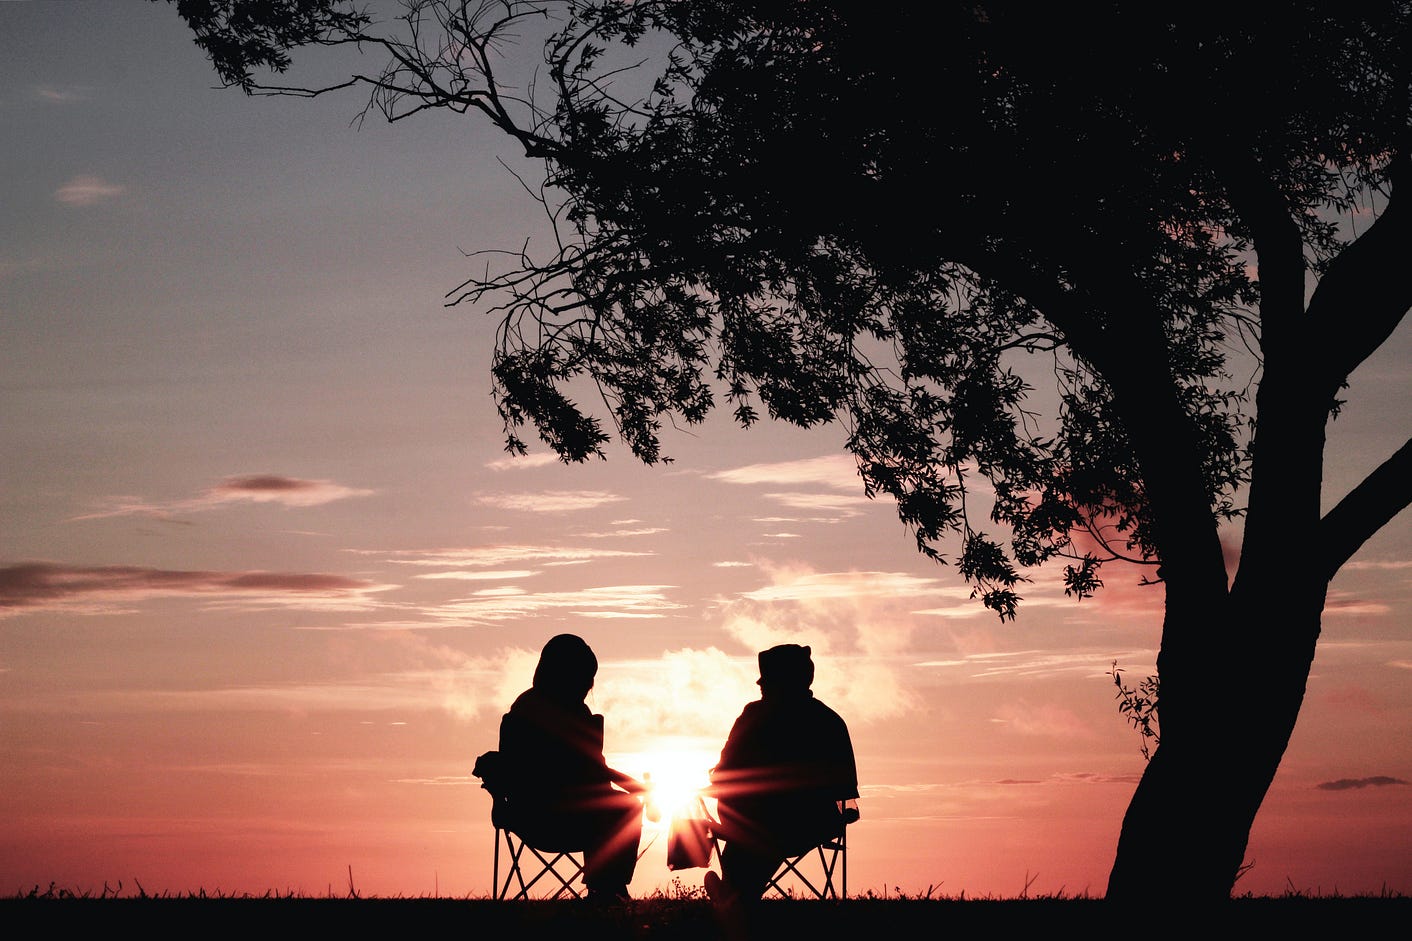 An image of two silhouettes at sunset.